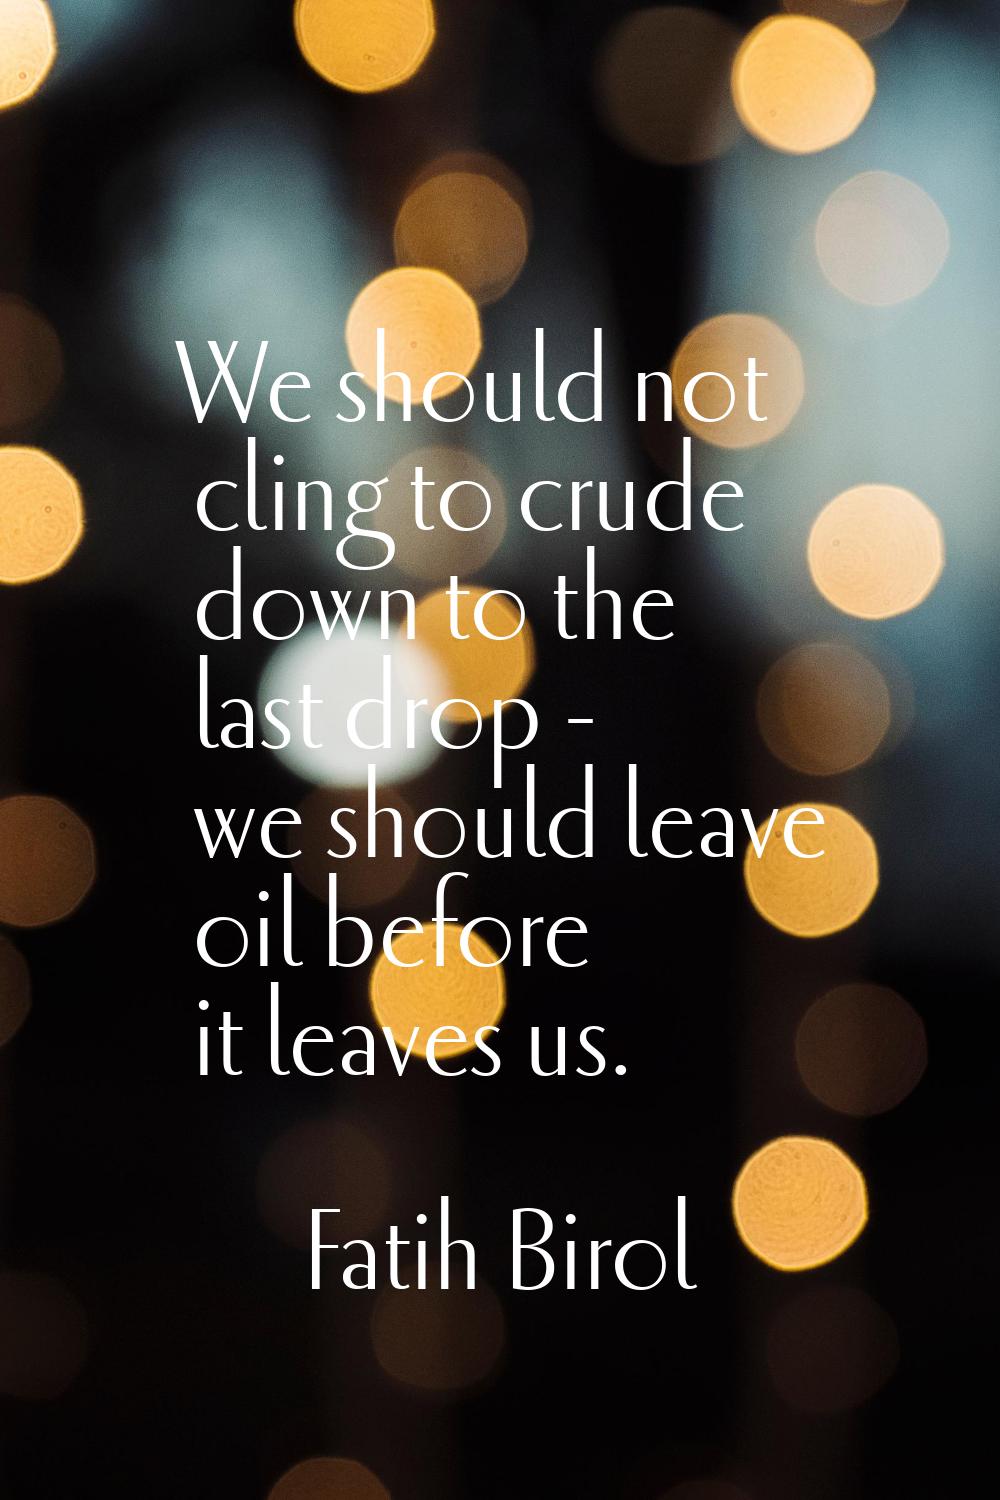 We should not cling to crude down to the last drop - we should leave oil before it leaves us.